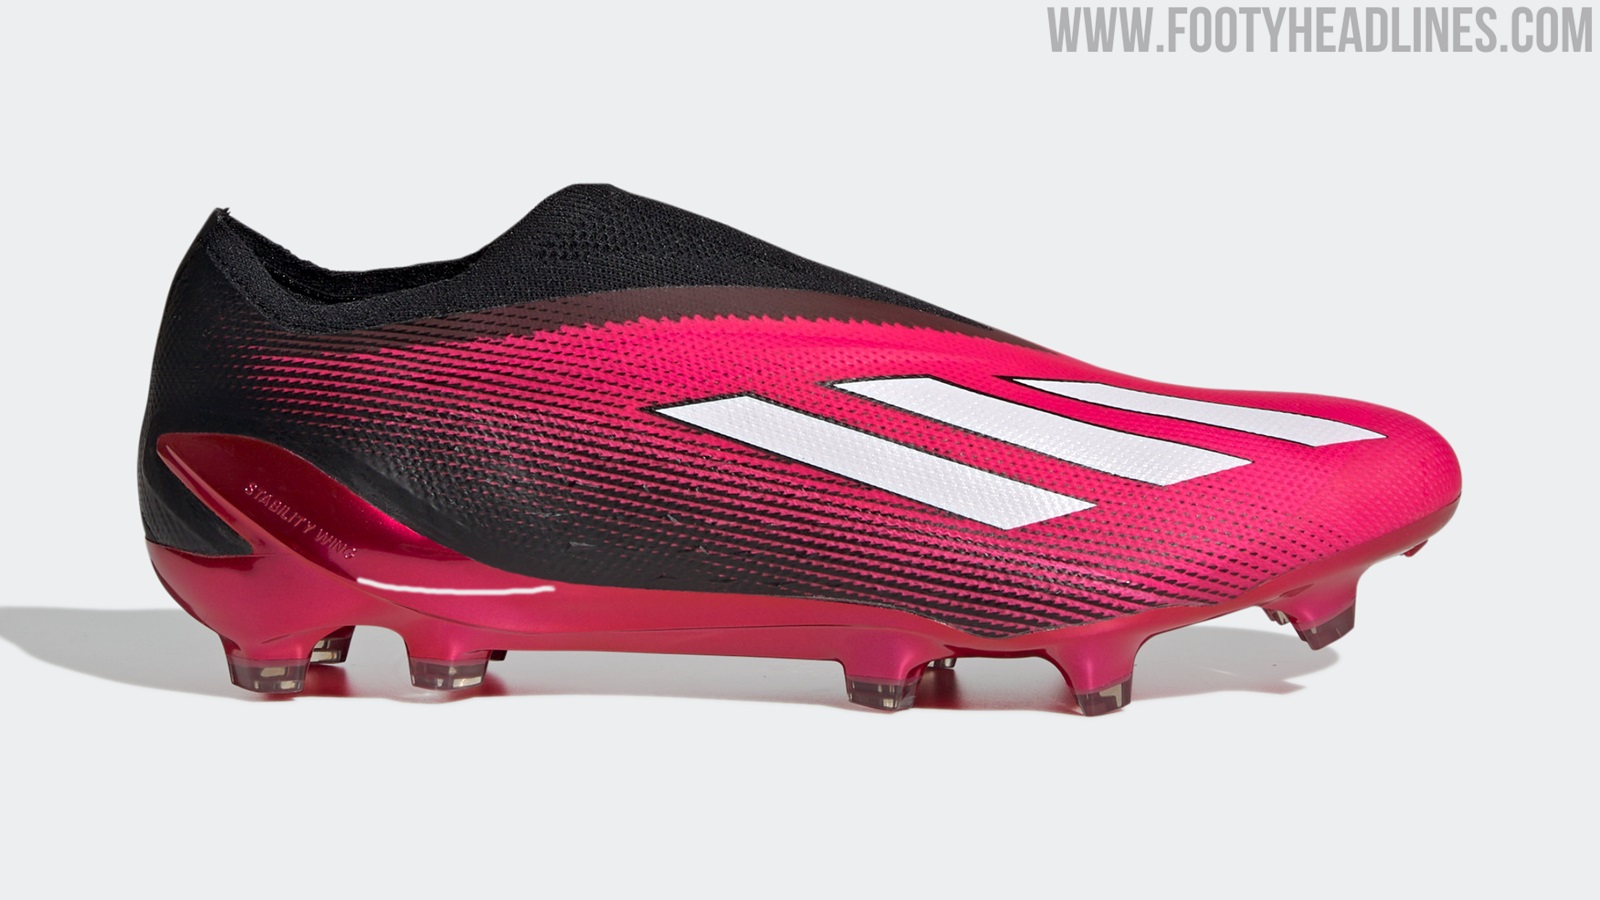 Adidas "Own Football" Pack Released - First Adidas 2023 On-Pitch Boots Collection Ft. Next-Gen Copa Predator - Footy Headlines